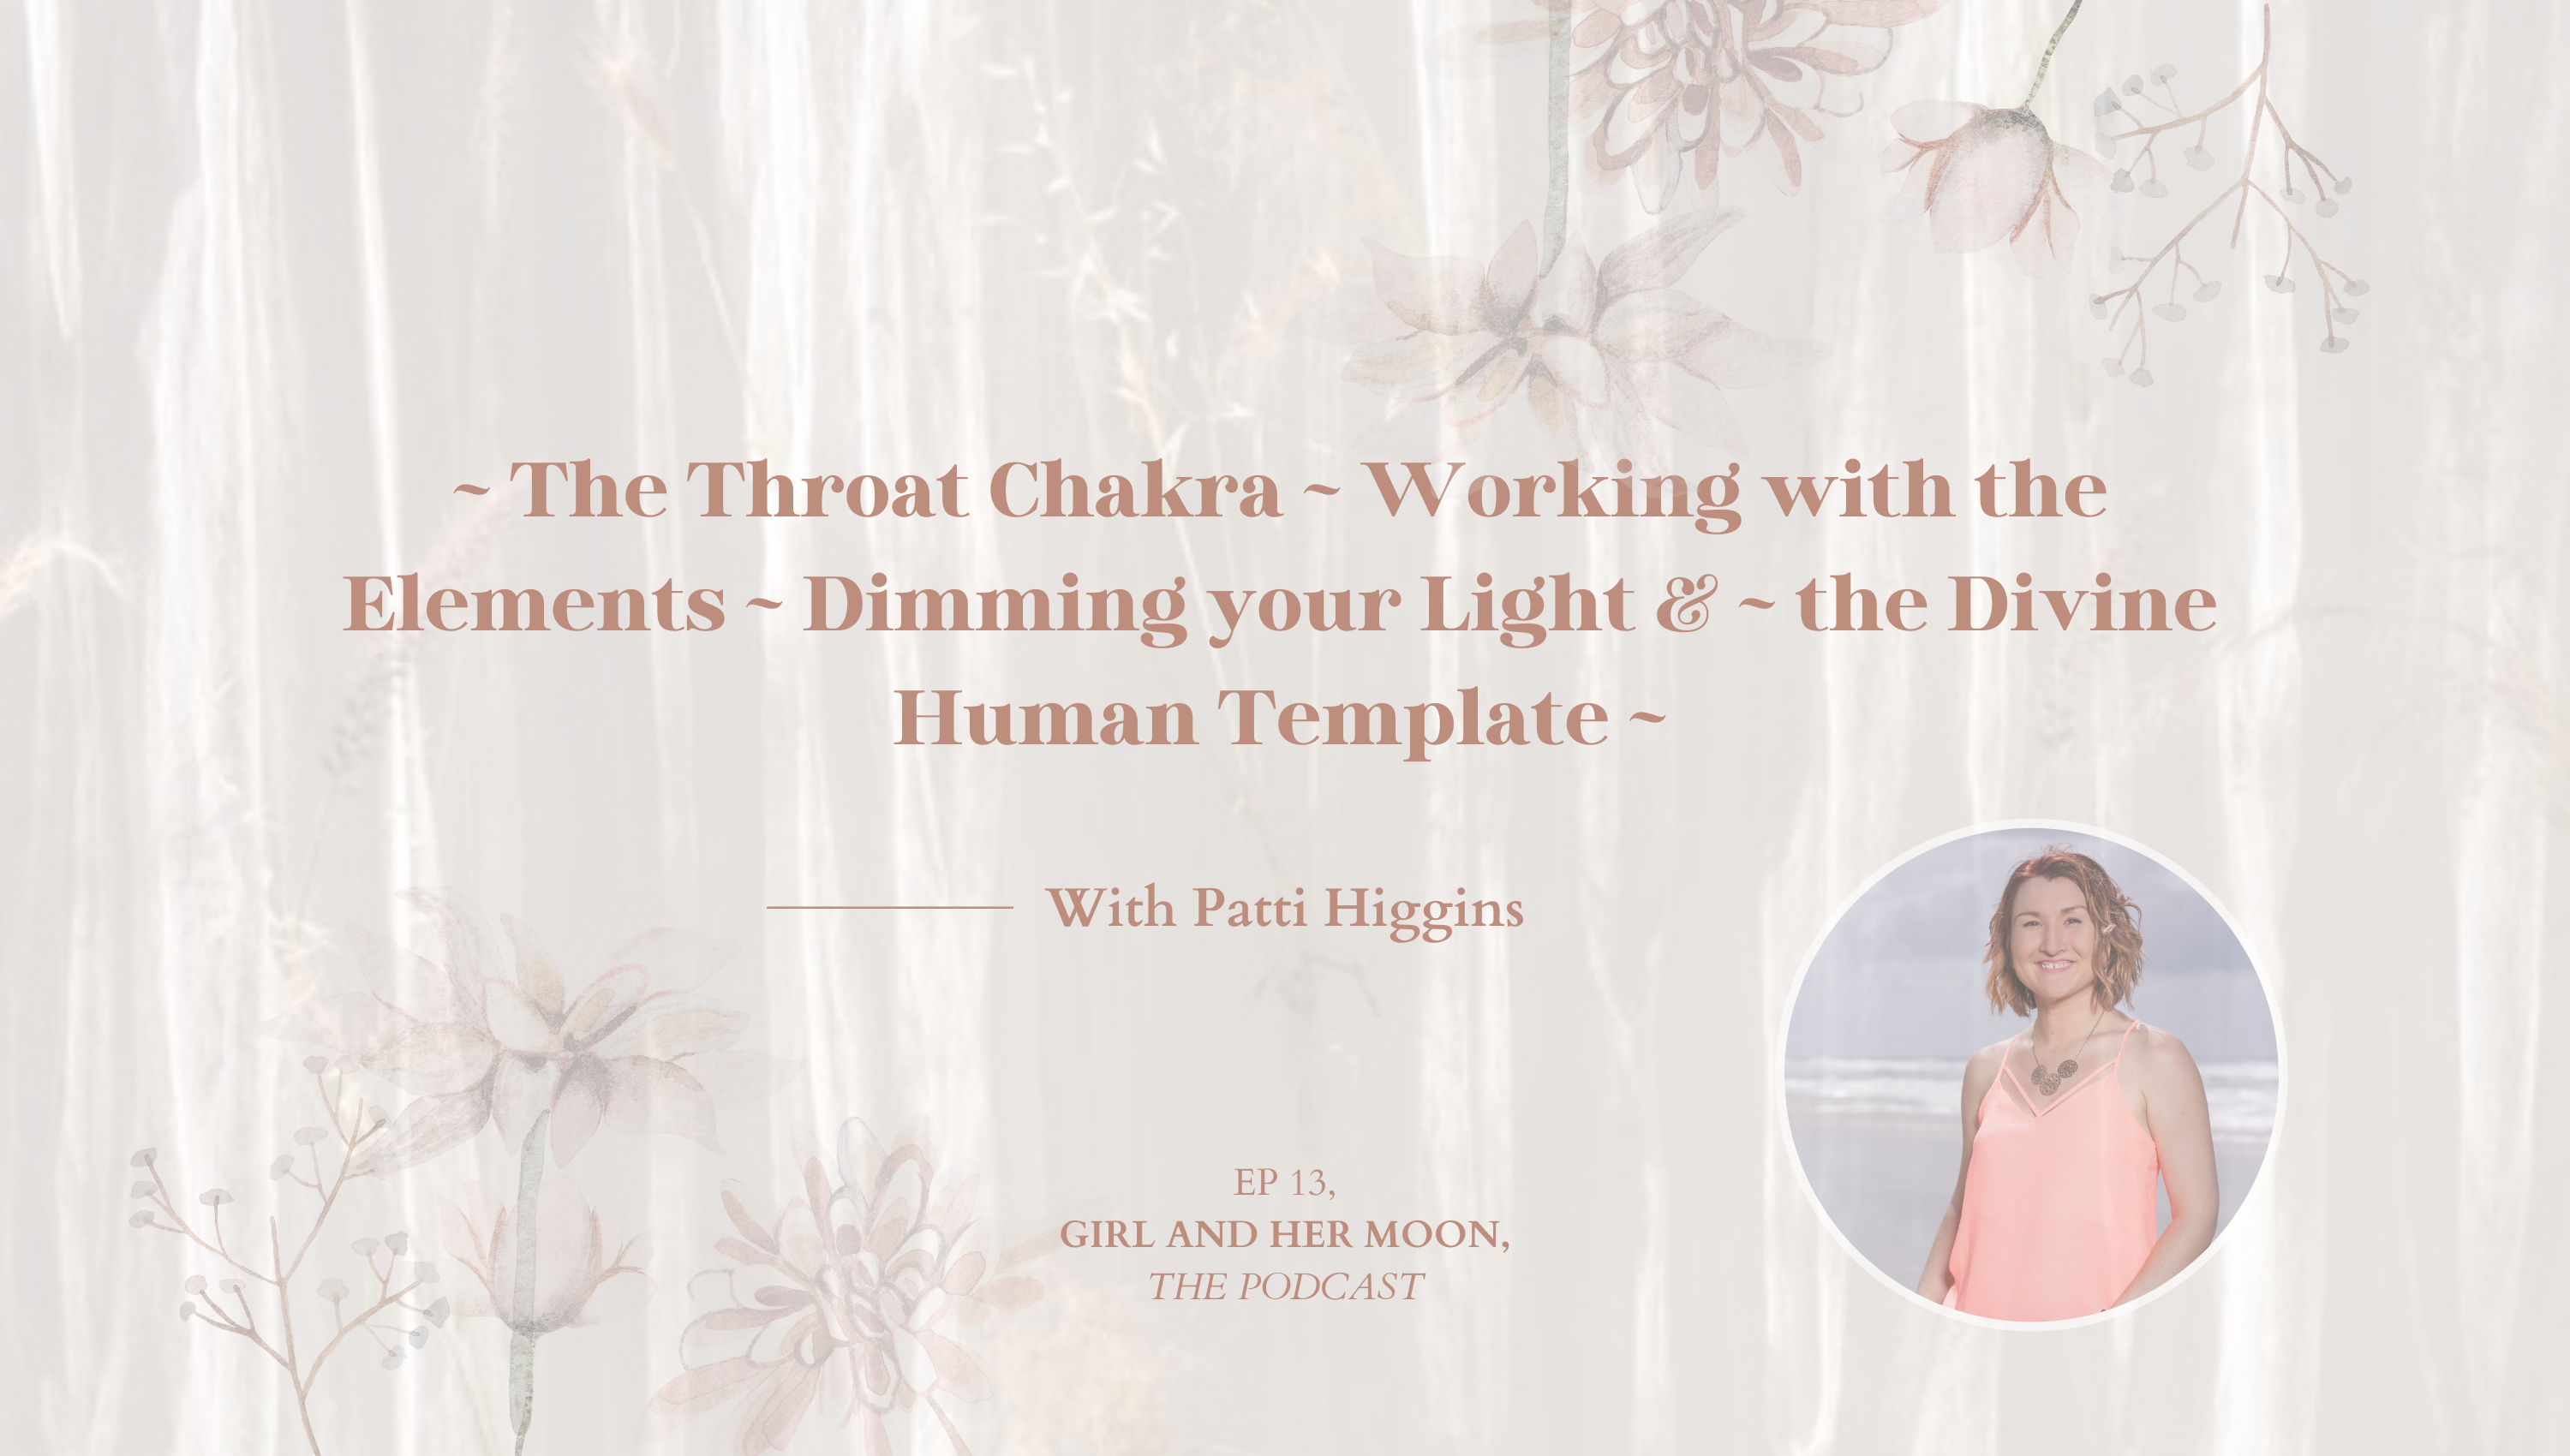 The Throat Chakra, Working with the Elements, Dimming your Light and the Divine Human Template with Patti Higgins